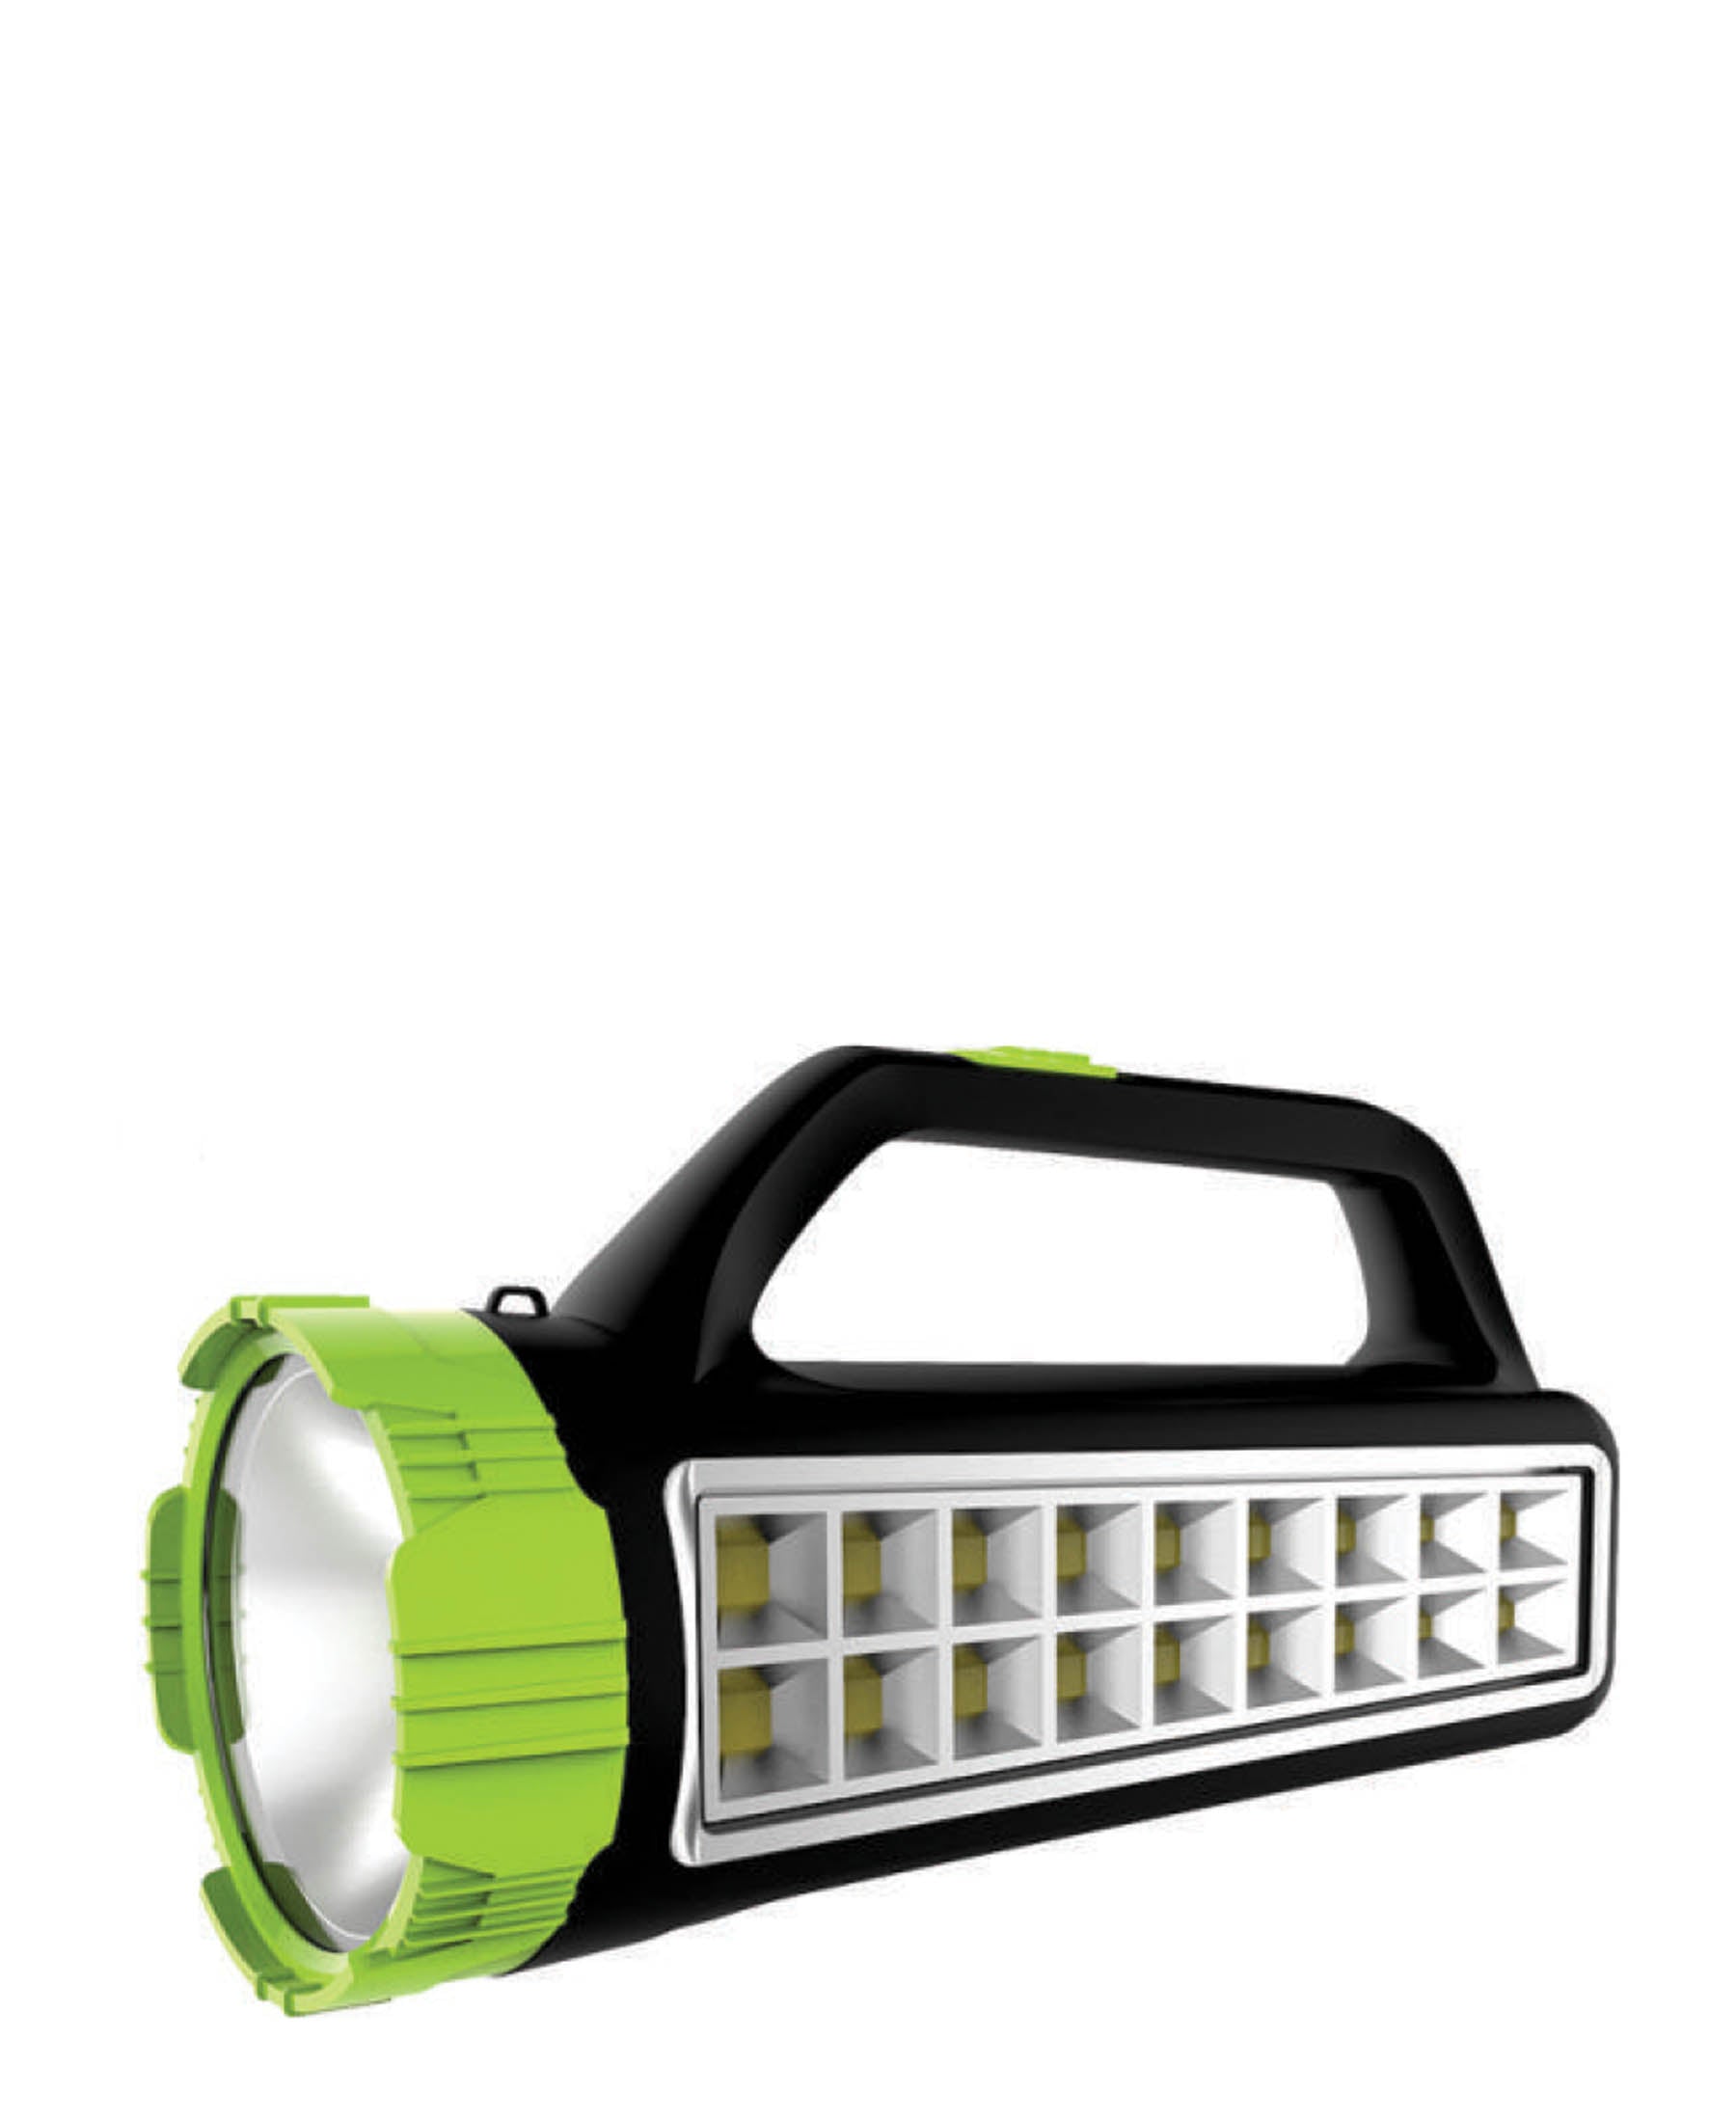 Conti 18 LED Rechargeable Search Light - Black & Green